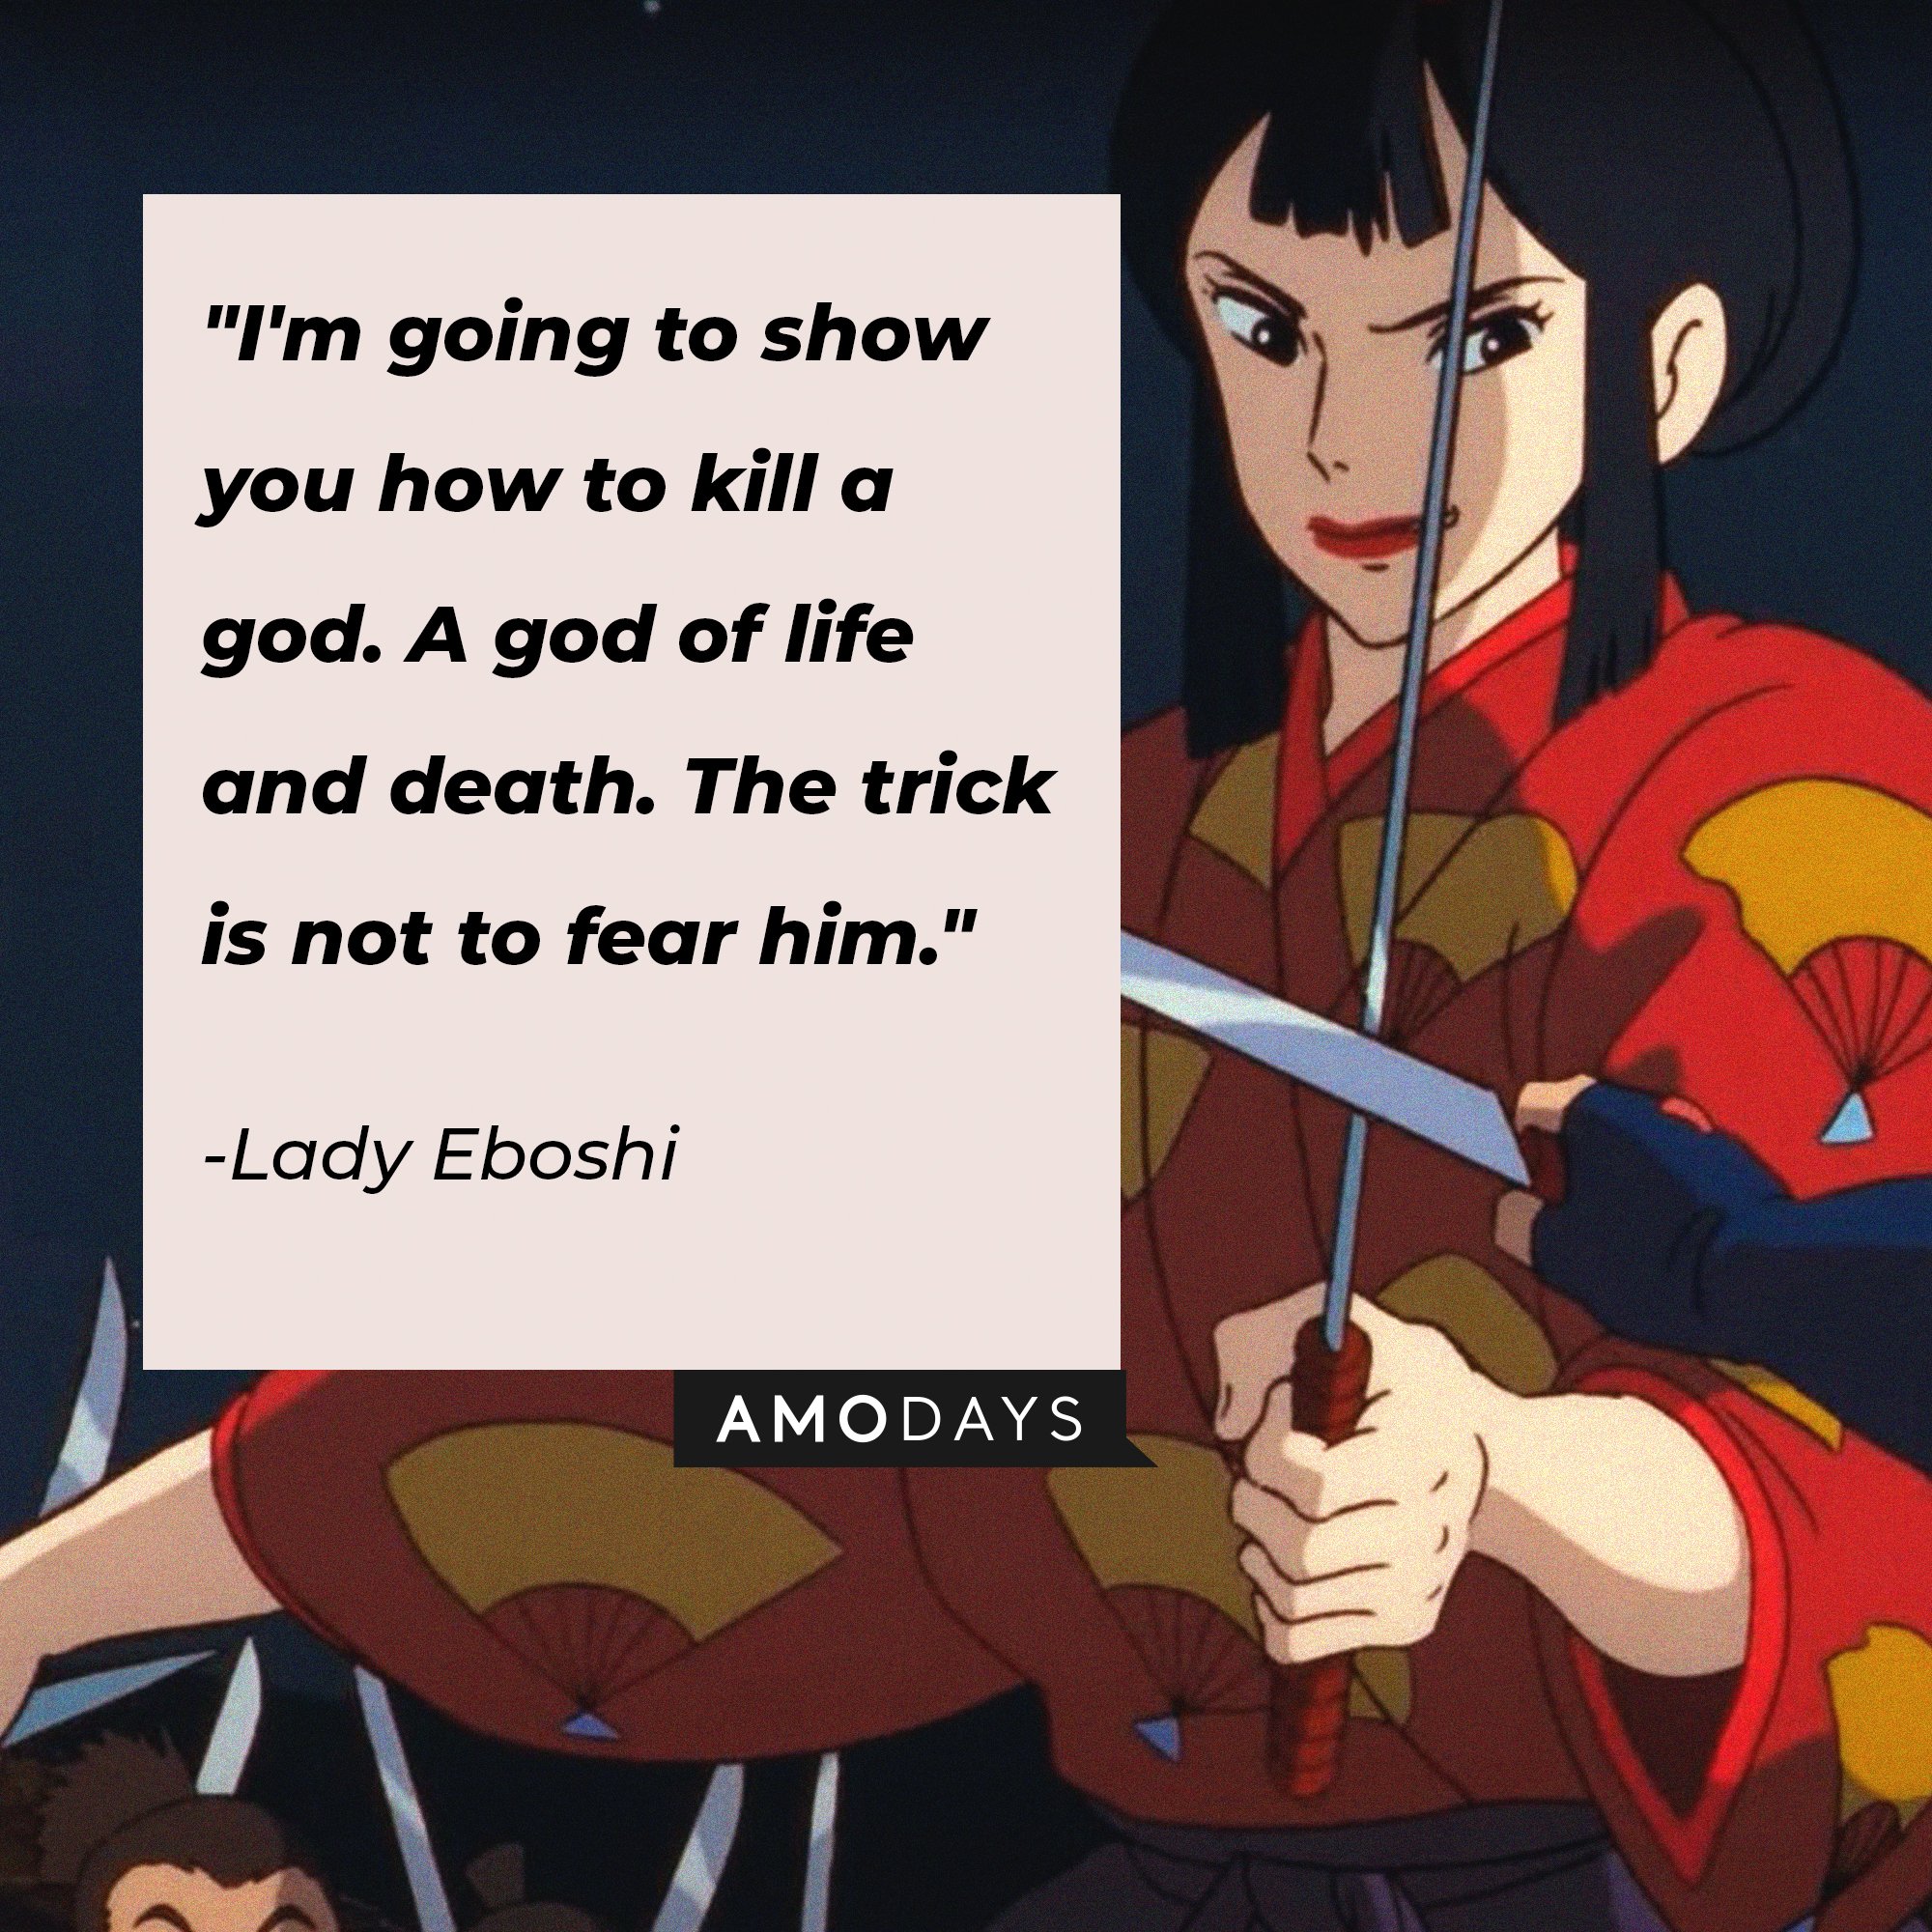 Lady Eboshi’s quote: "I'm going to show you how to kill a god. A god of life and death. The trick is not to fear him." |  Image: AmoDays